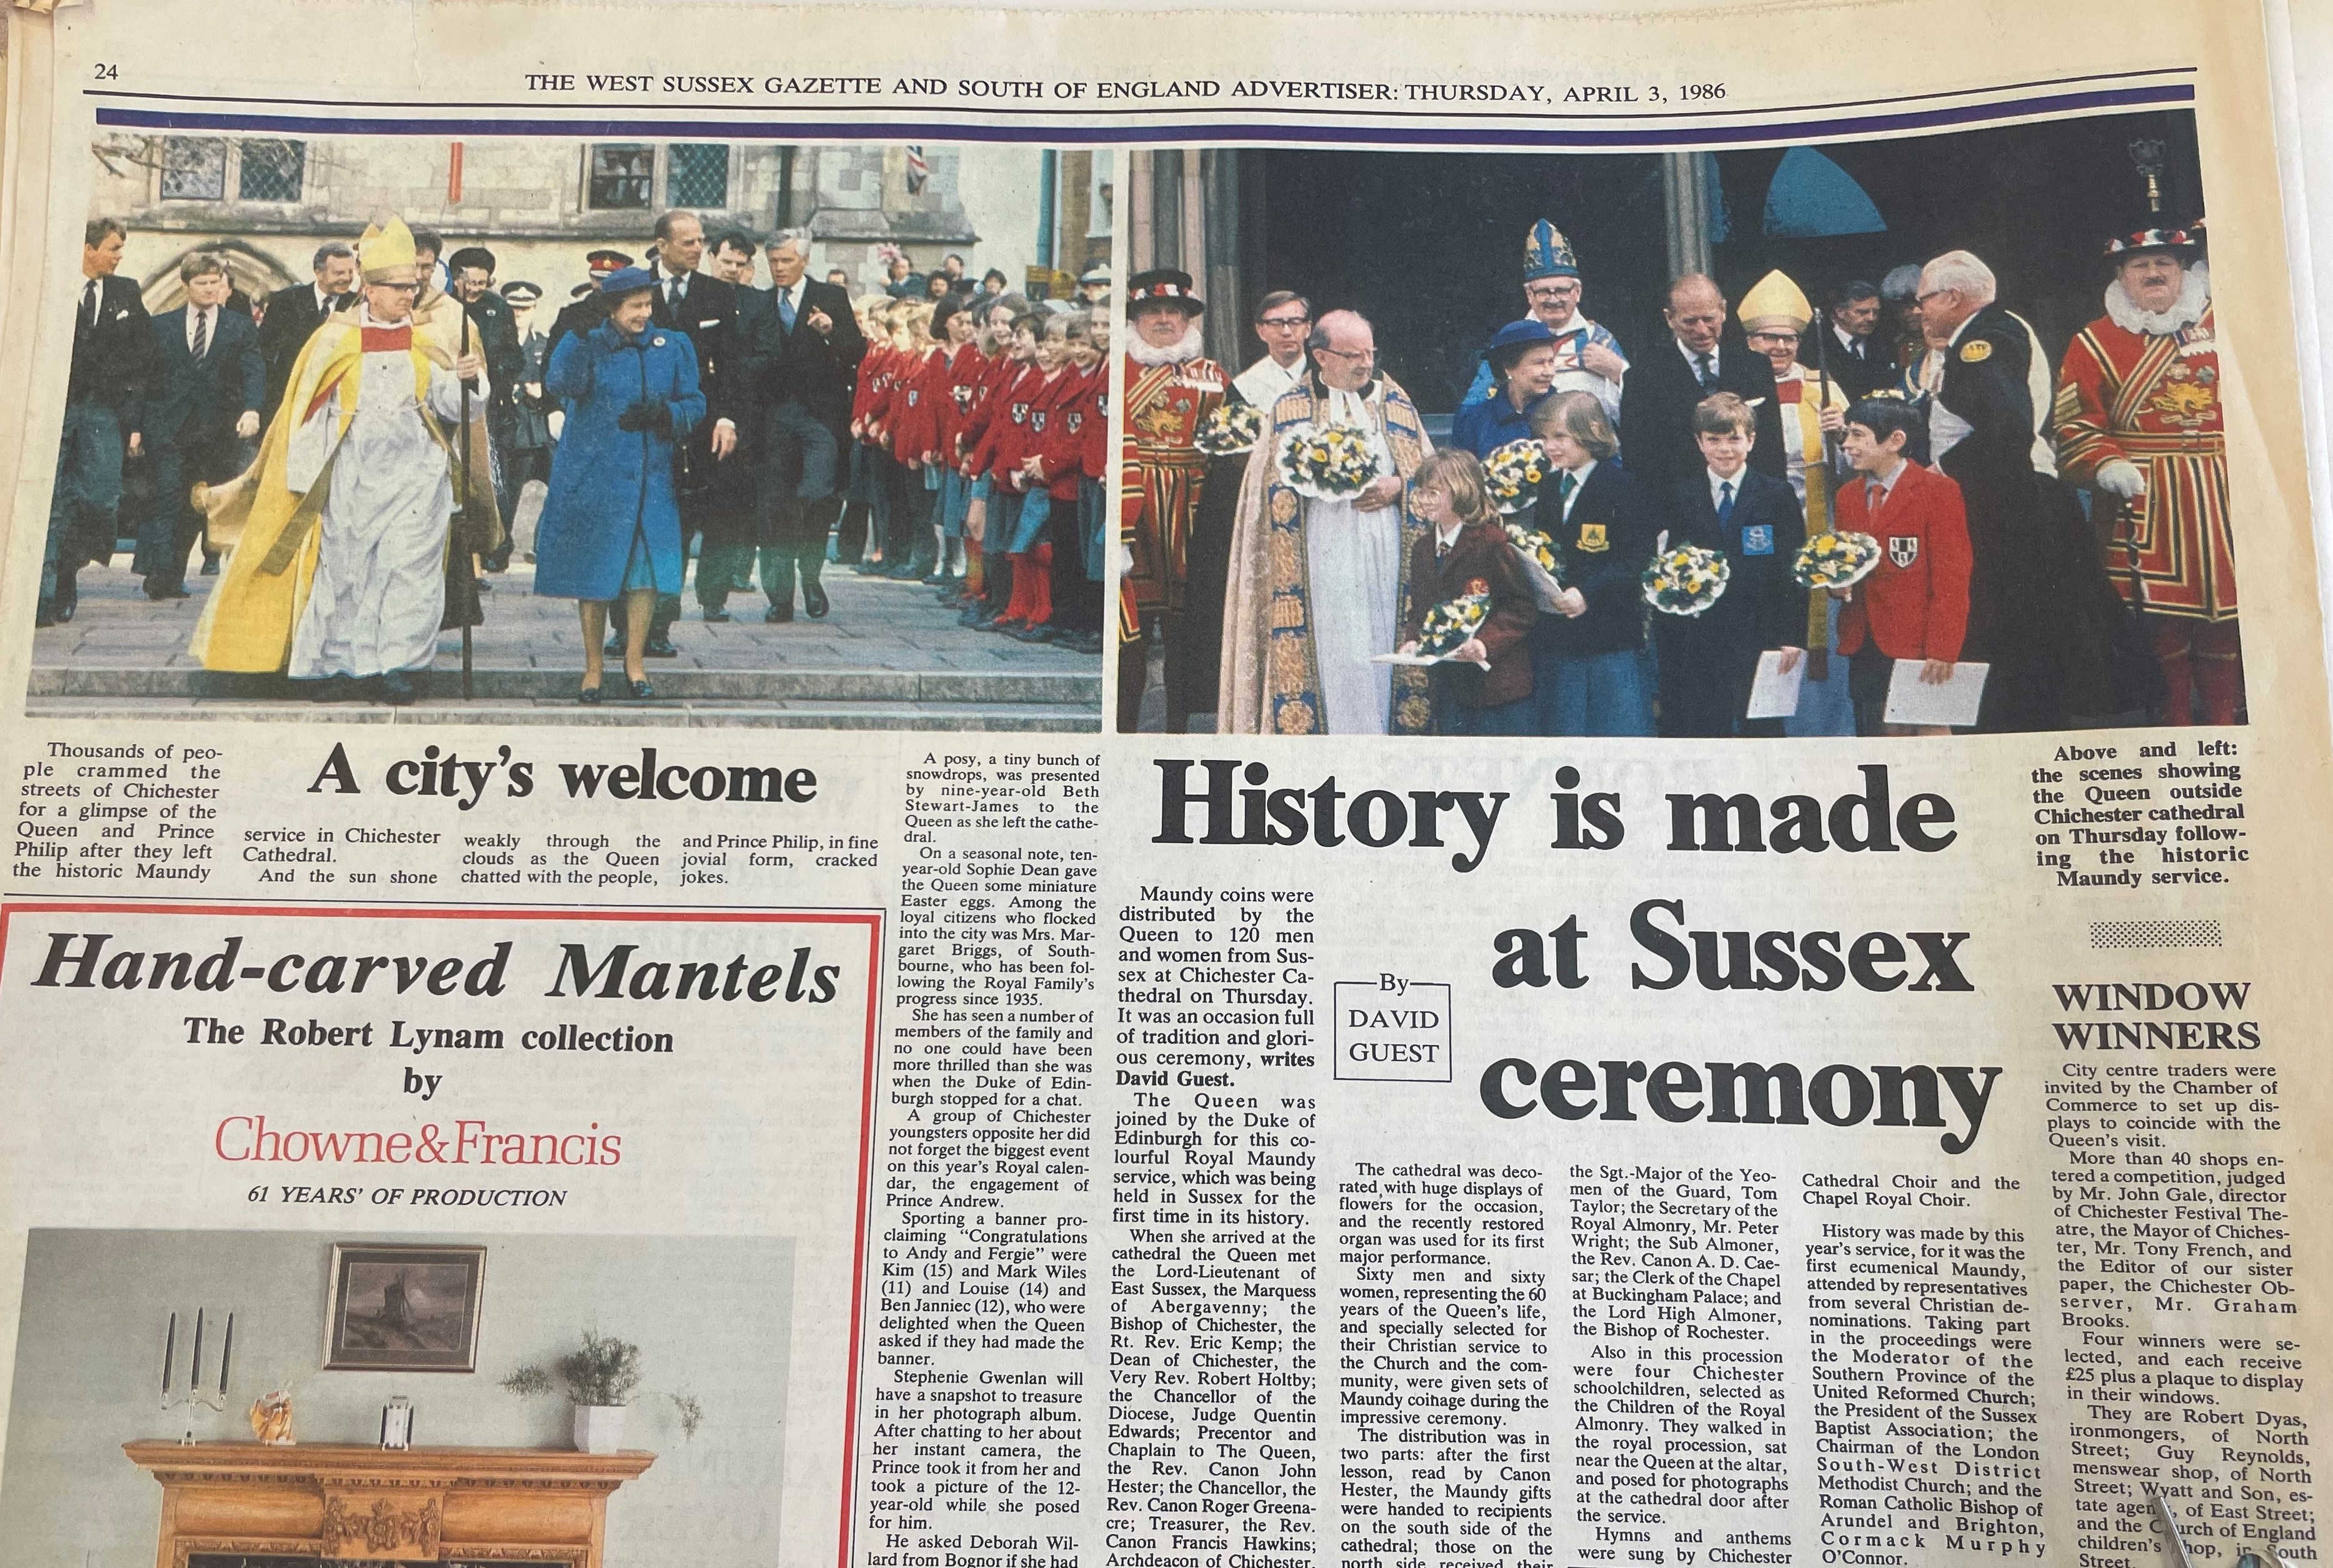 The article clipping of Her Majesty's visit